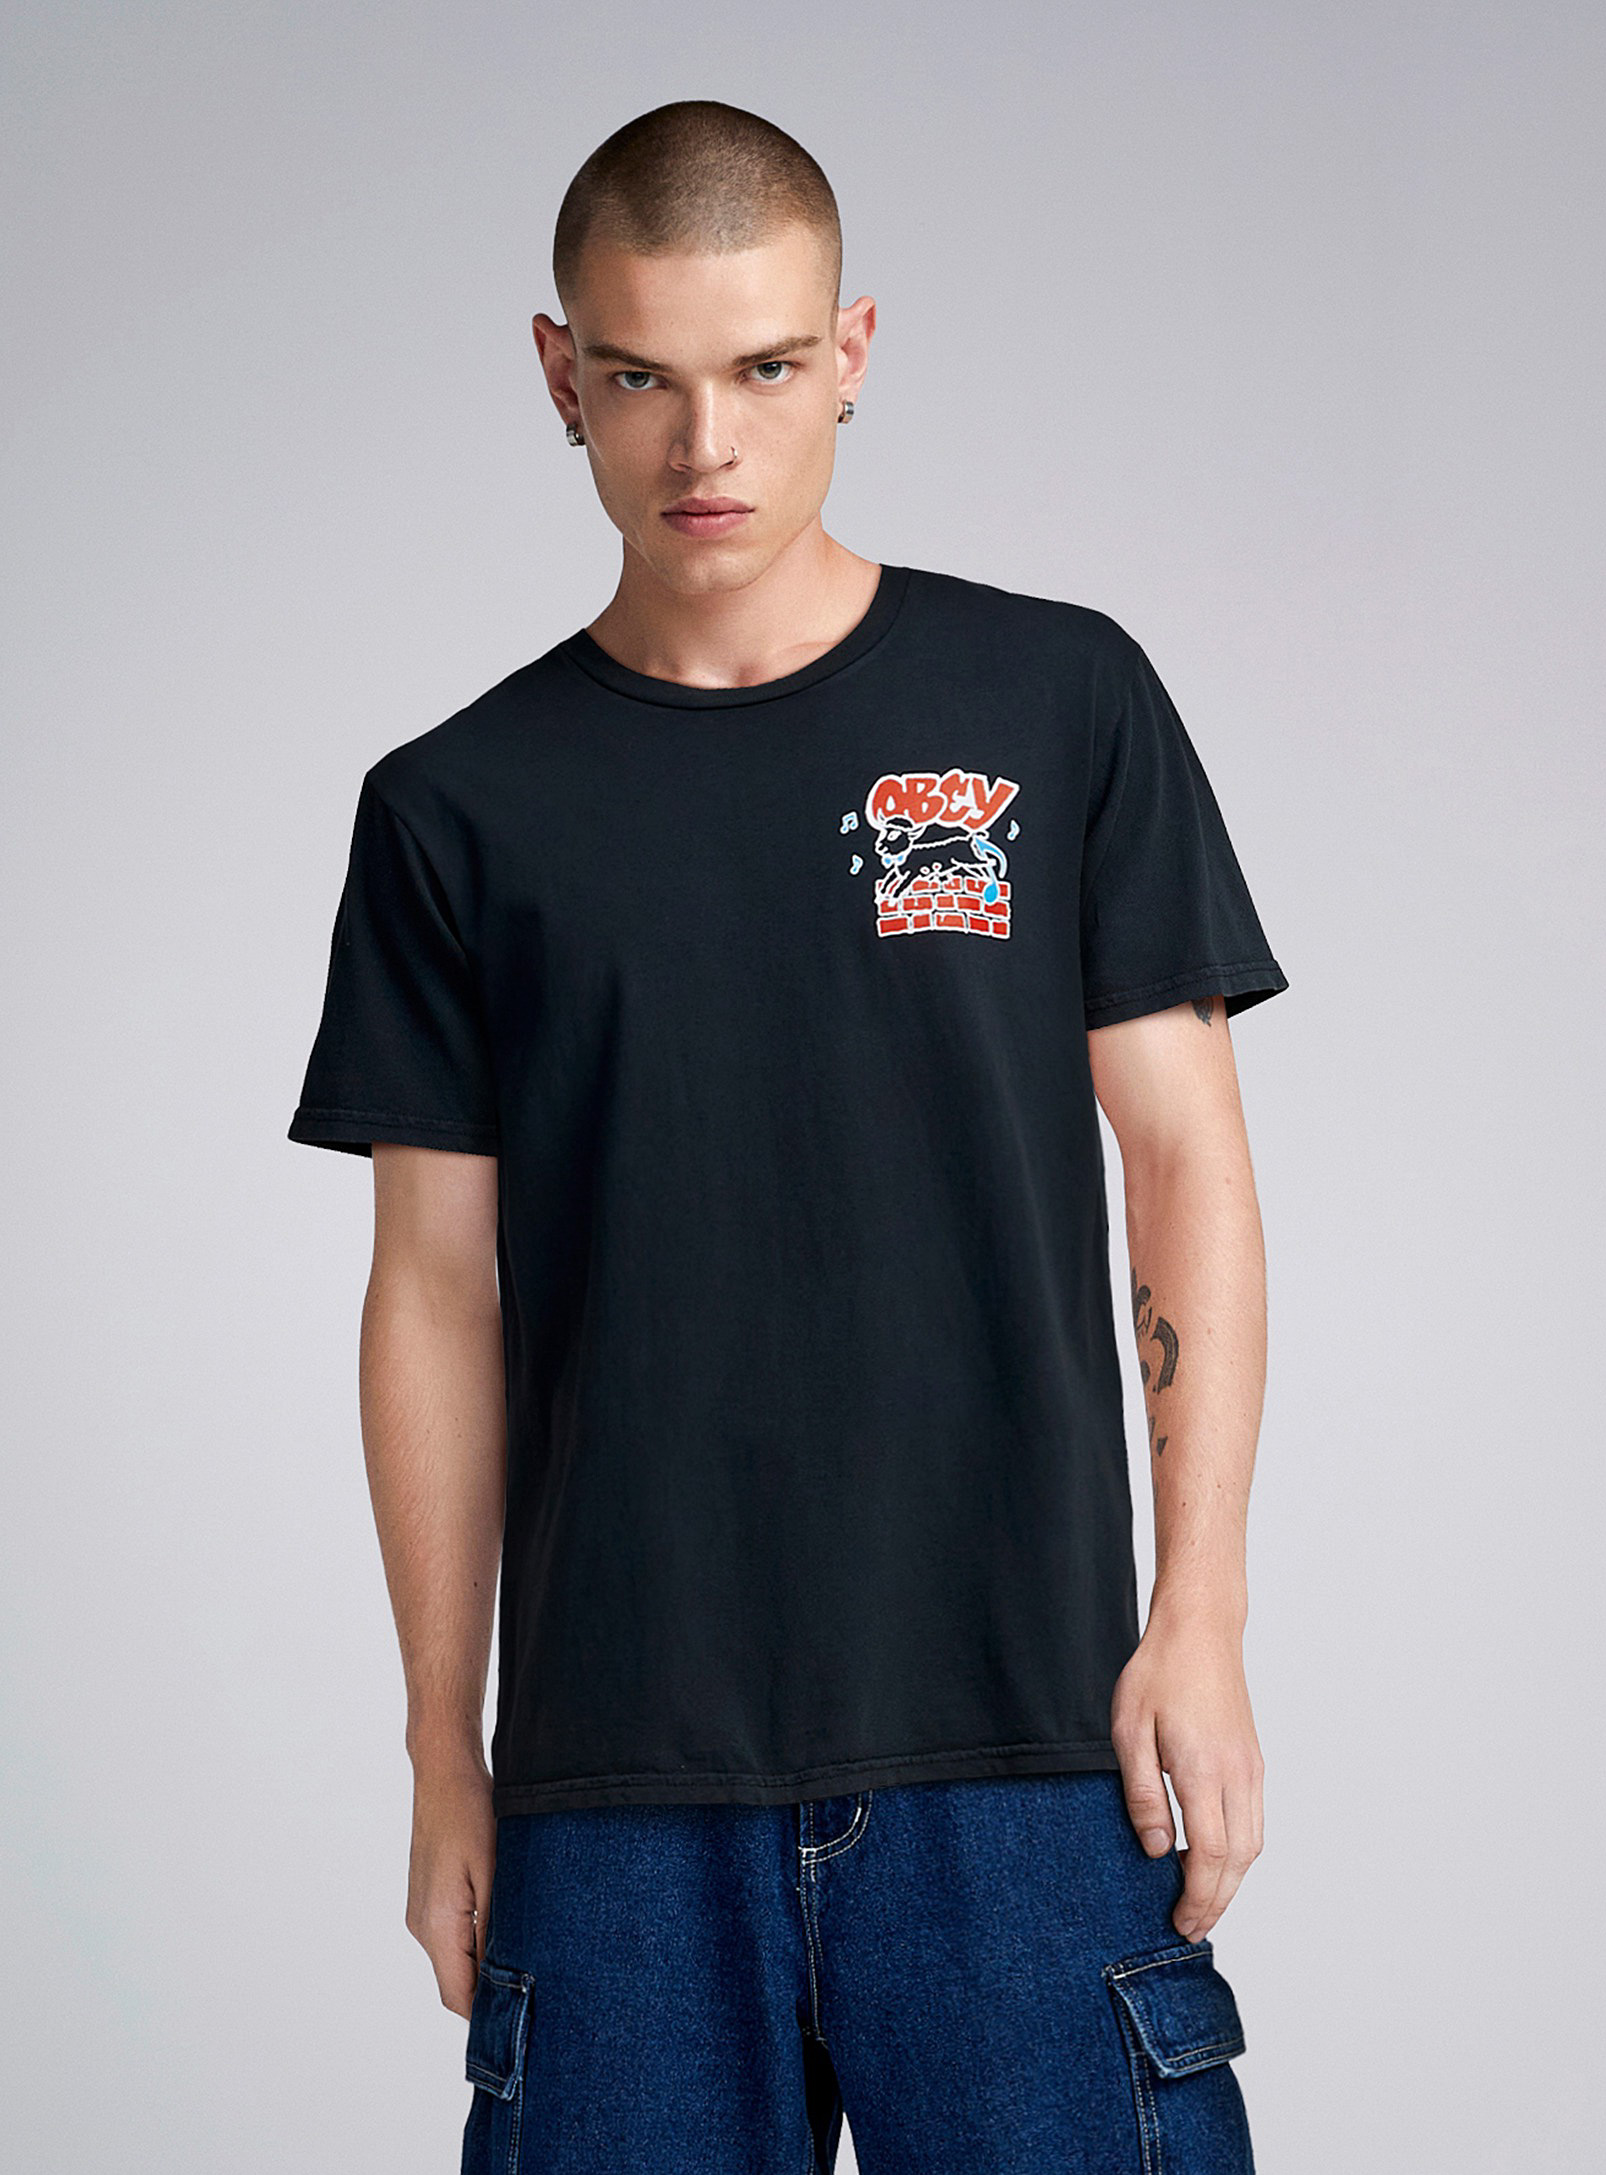 Obey - Men's Out of Step T-shirt